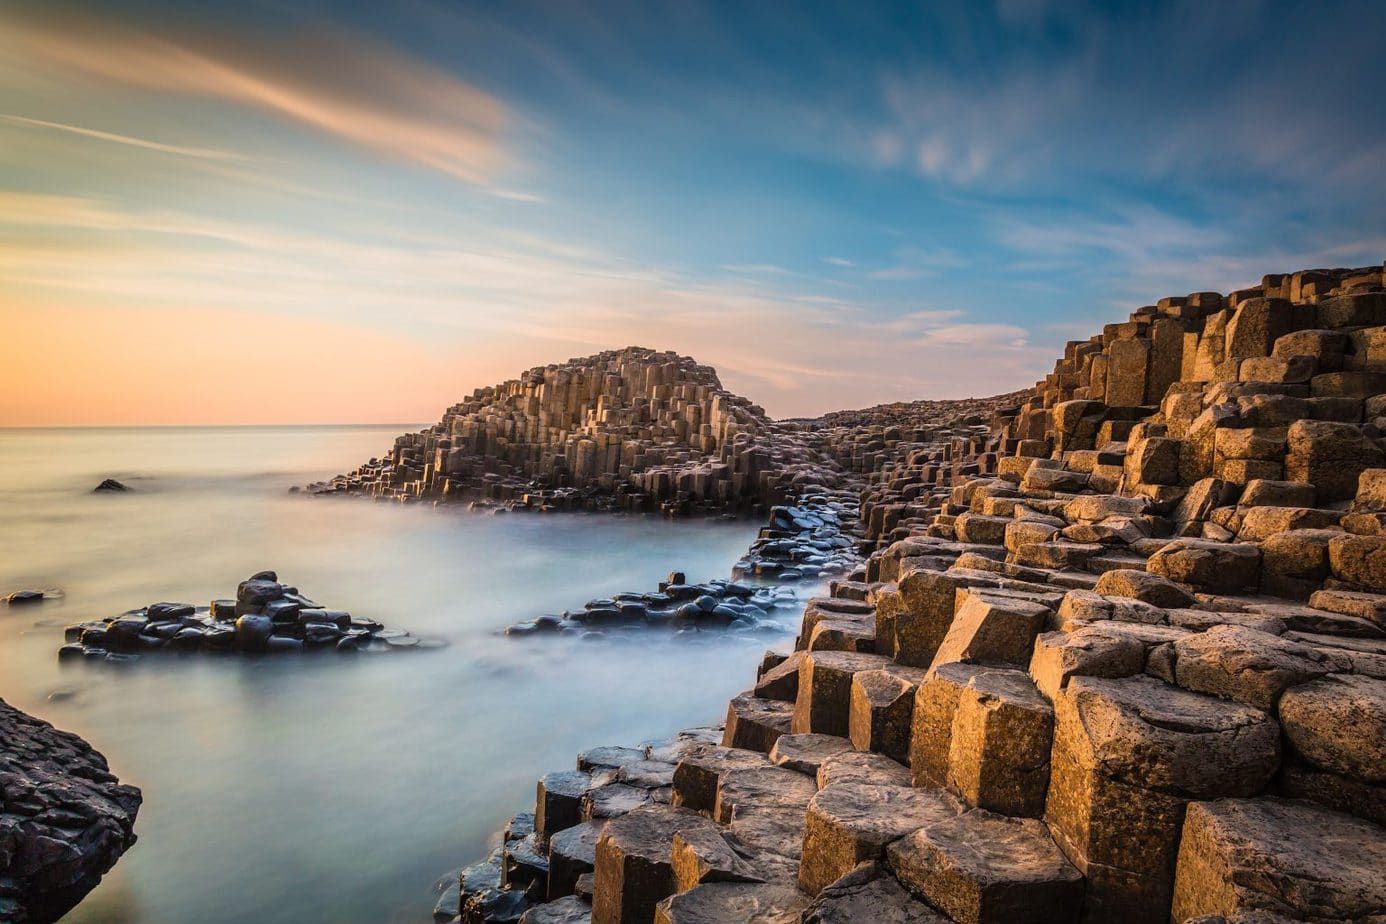 visit places in northern ireland